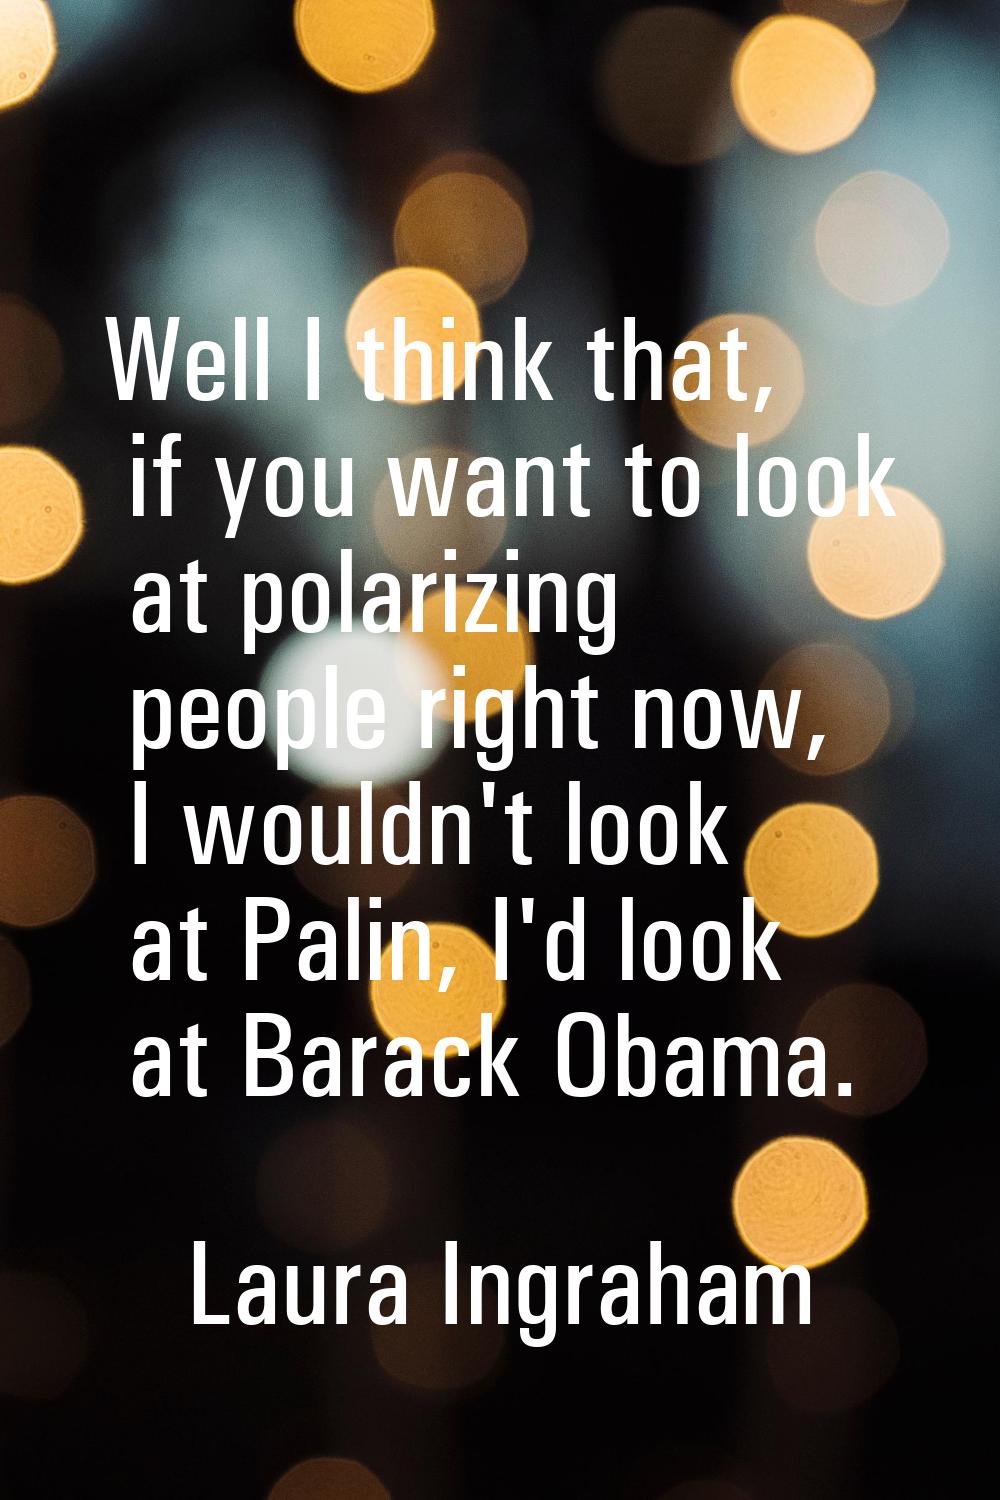 Well I think that, if you want to look at polarizing people right now, I wouldn't look at Palin, I'